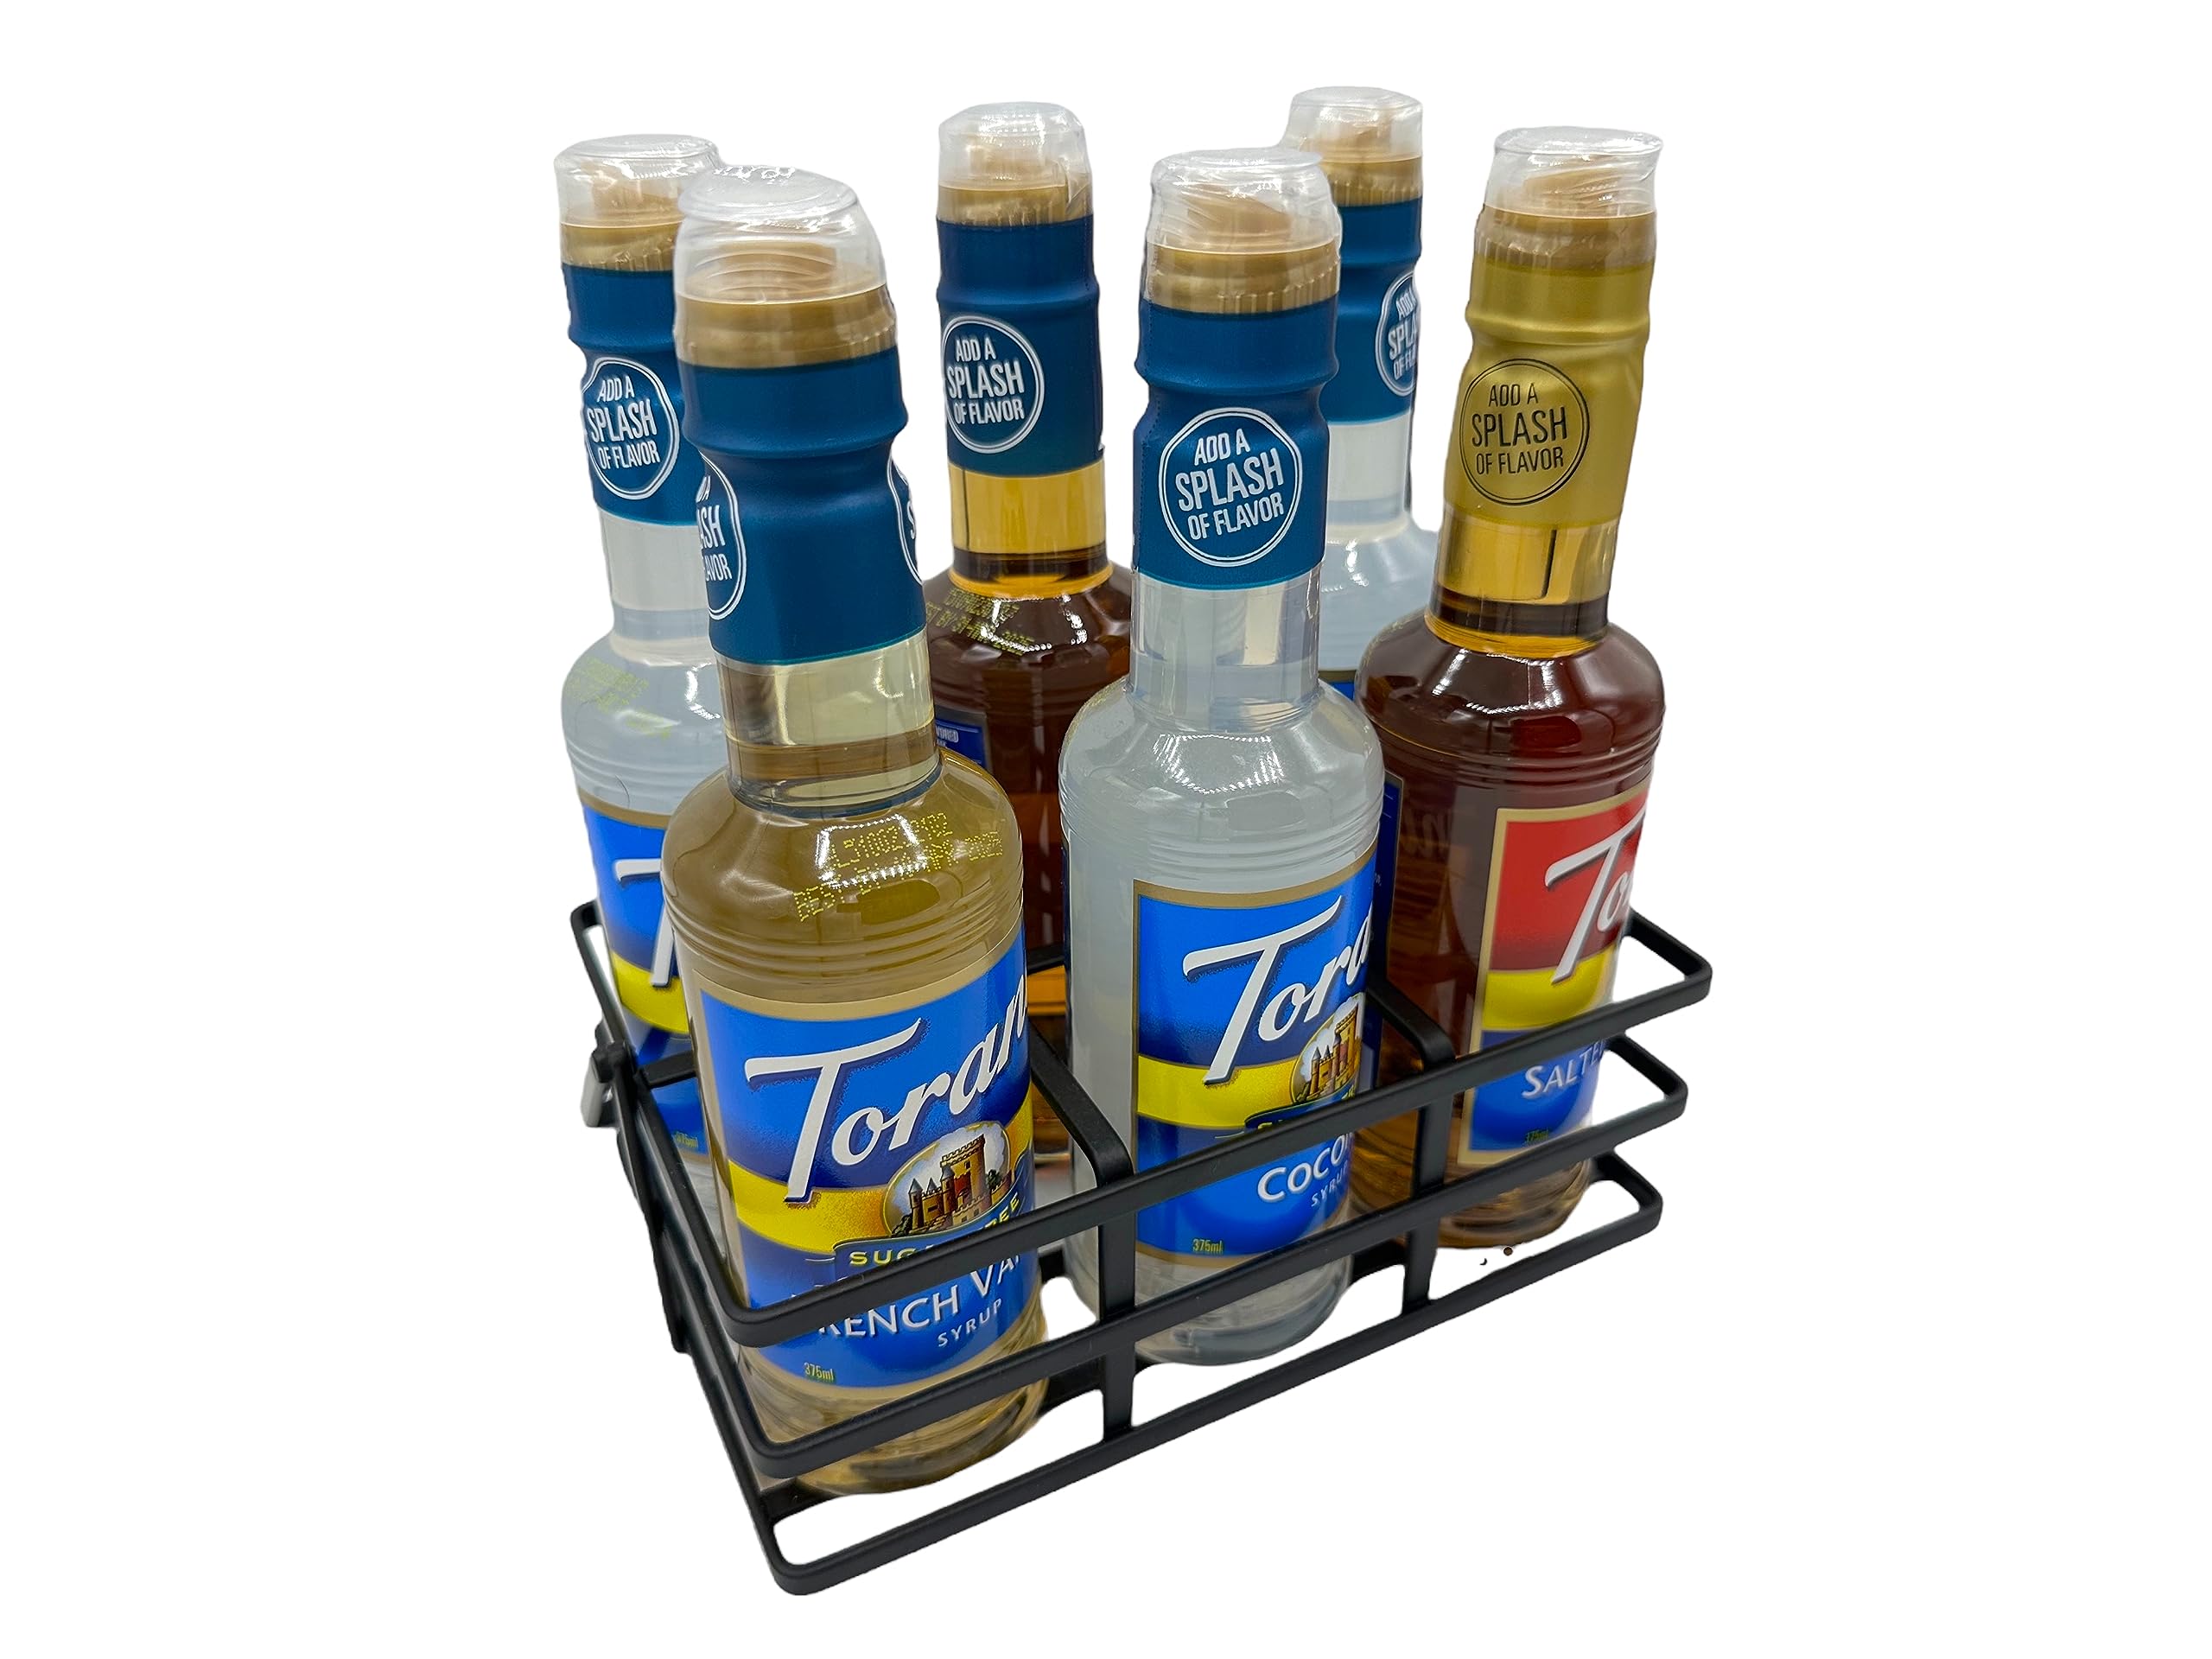 Coffee syrup organizer for 12.7 Oz bottles - Unique rack for Torani Syrup 12.7 ounce bottles, great coffee bar organizer and decor - Perfect size bar accessory 6 bottle capacity holder